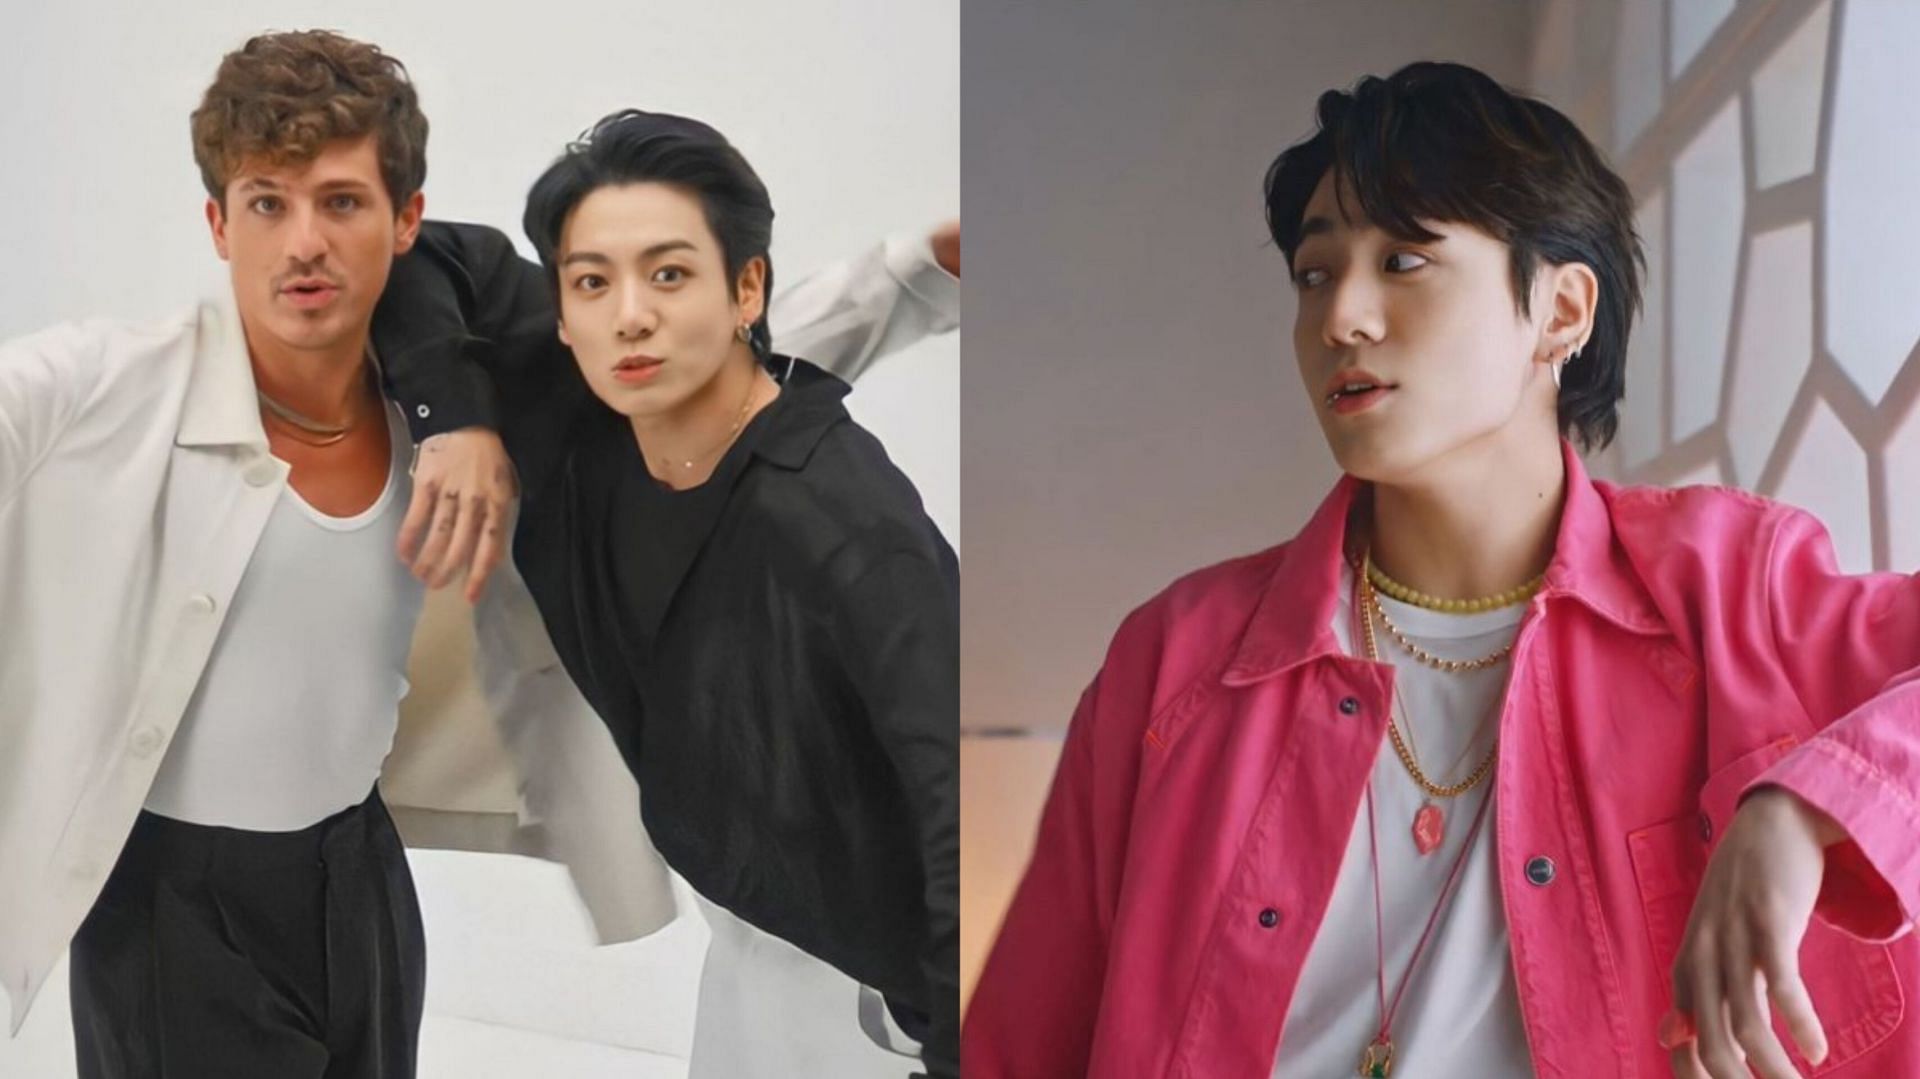 Featuring Jungkook and Charlie Puth (Image via Bighit Entertainment)